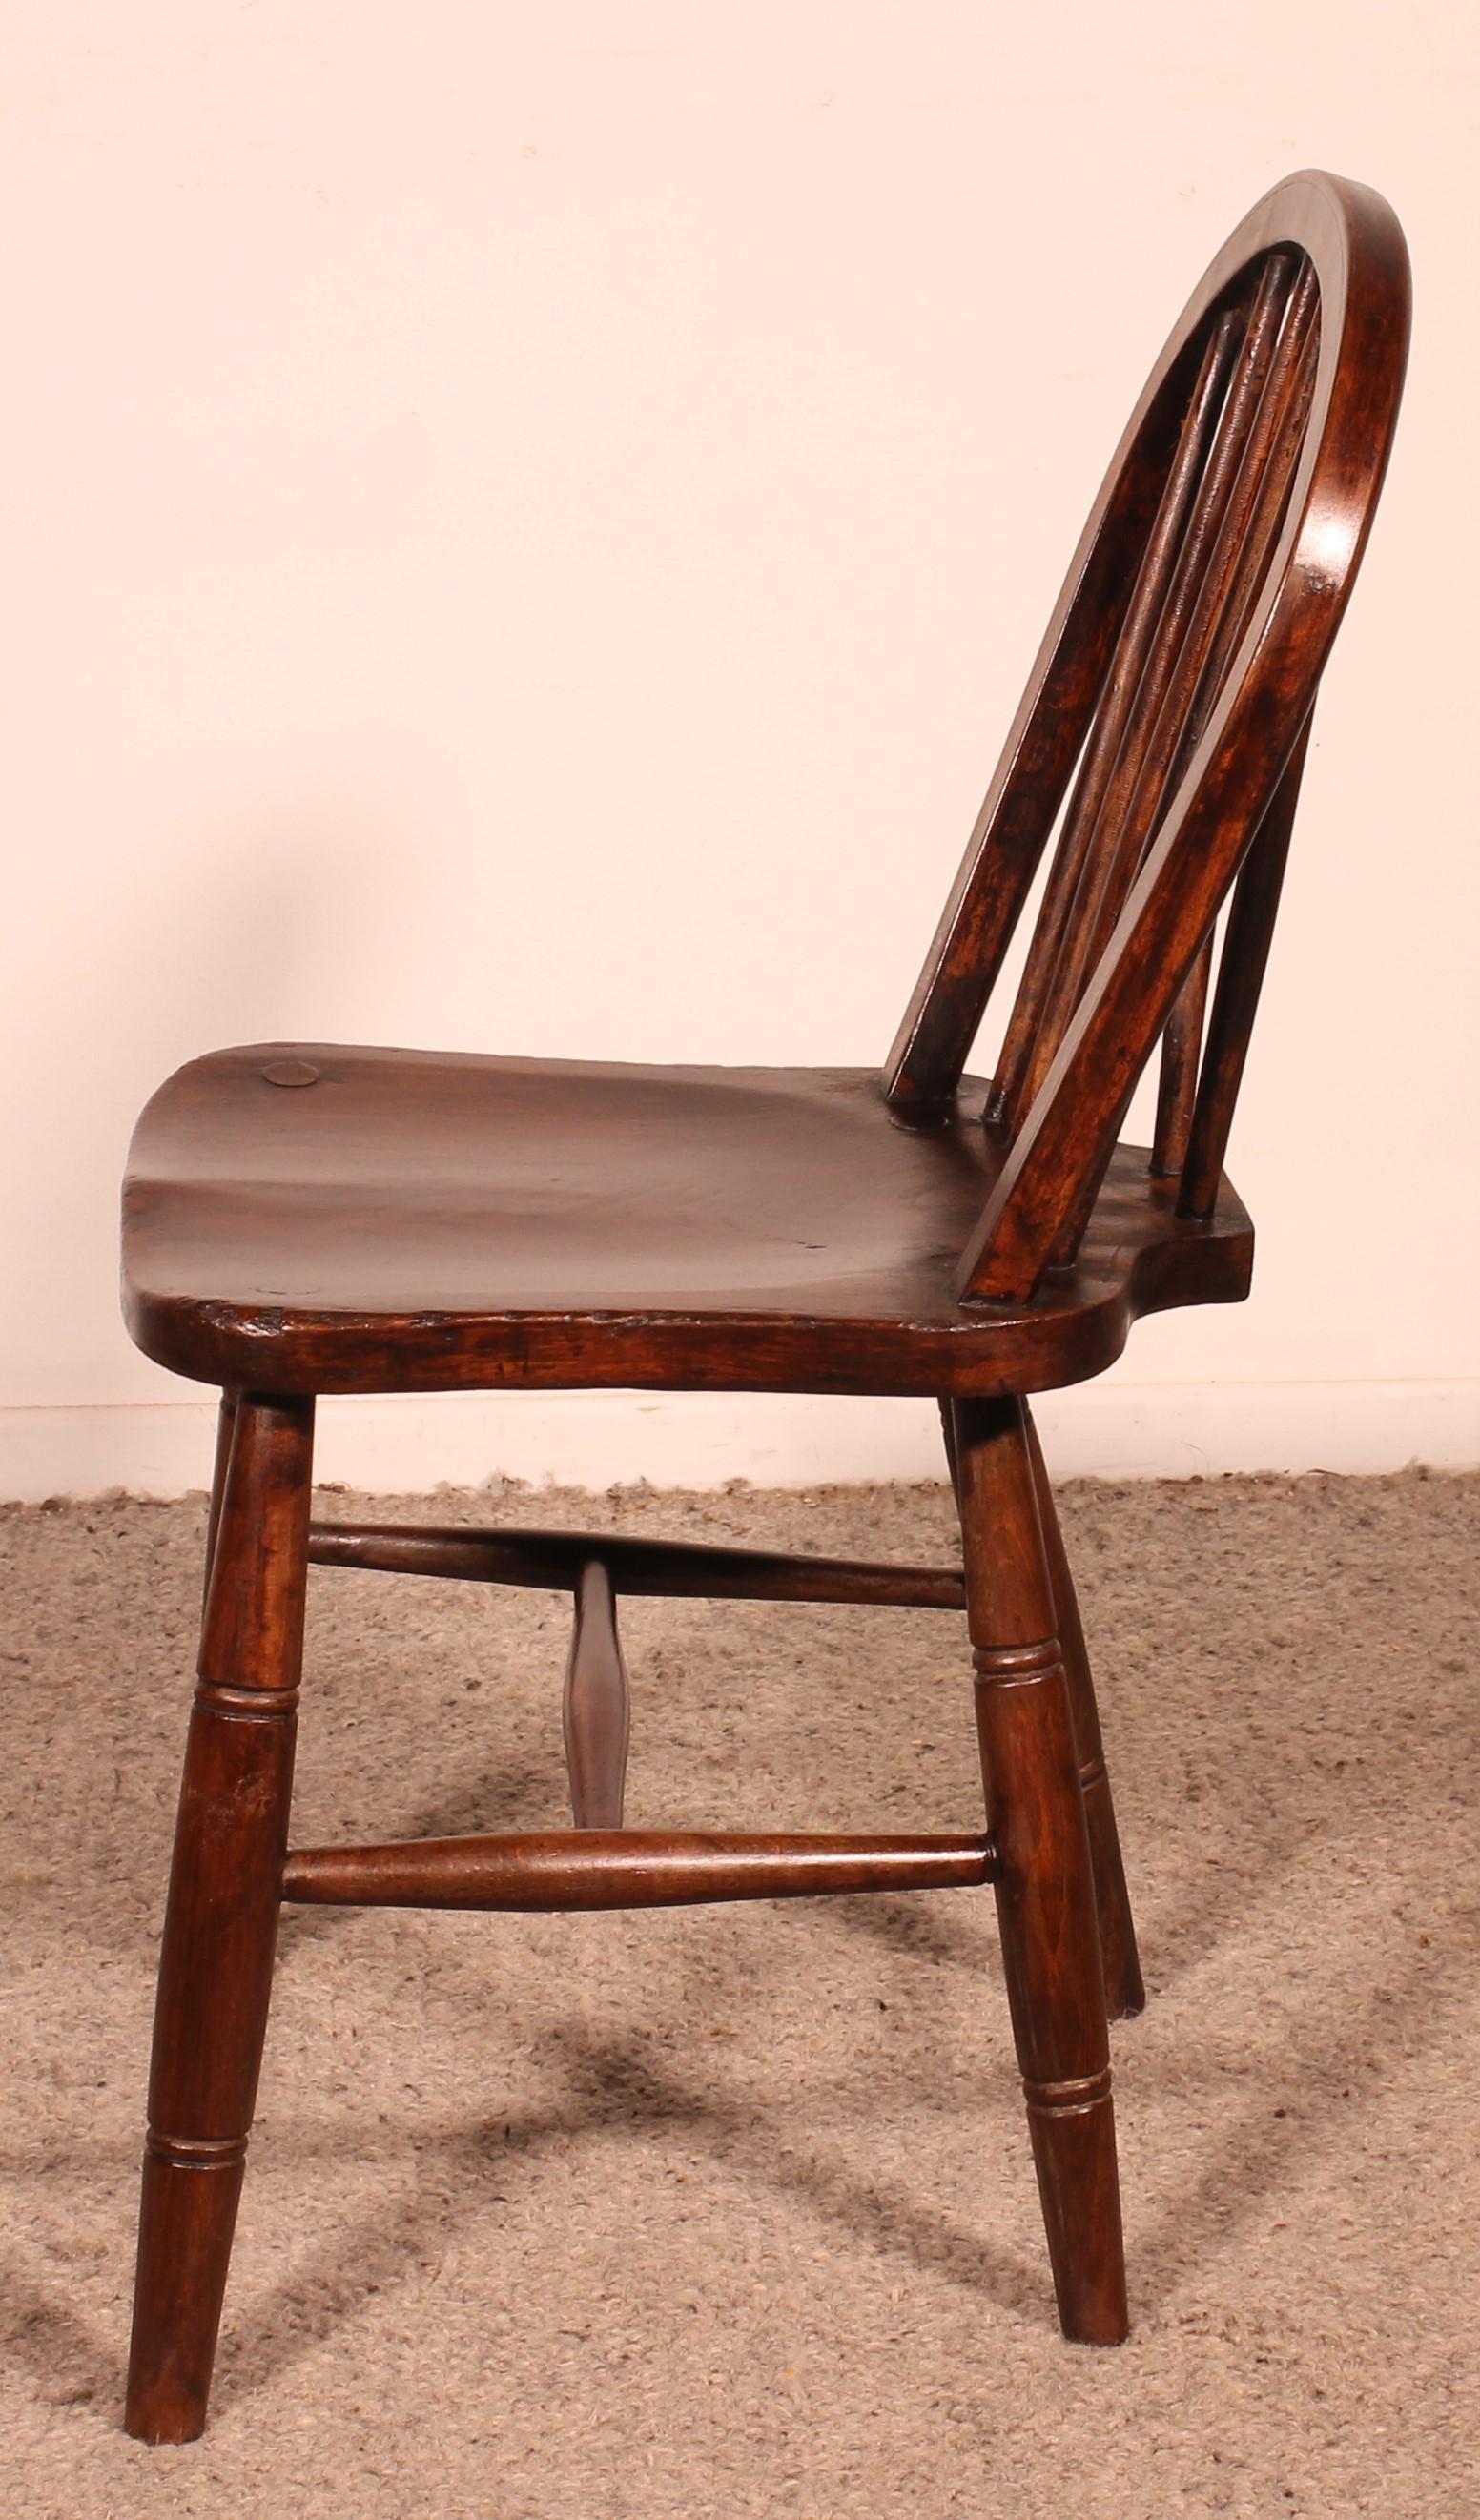 Victorian Set Of 4 Windsor Chairs From The 19th Century For Sale